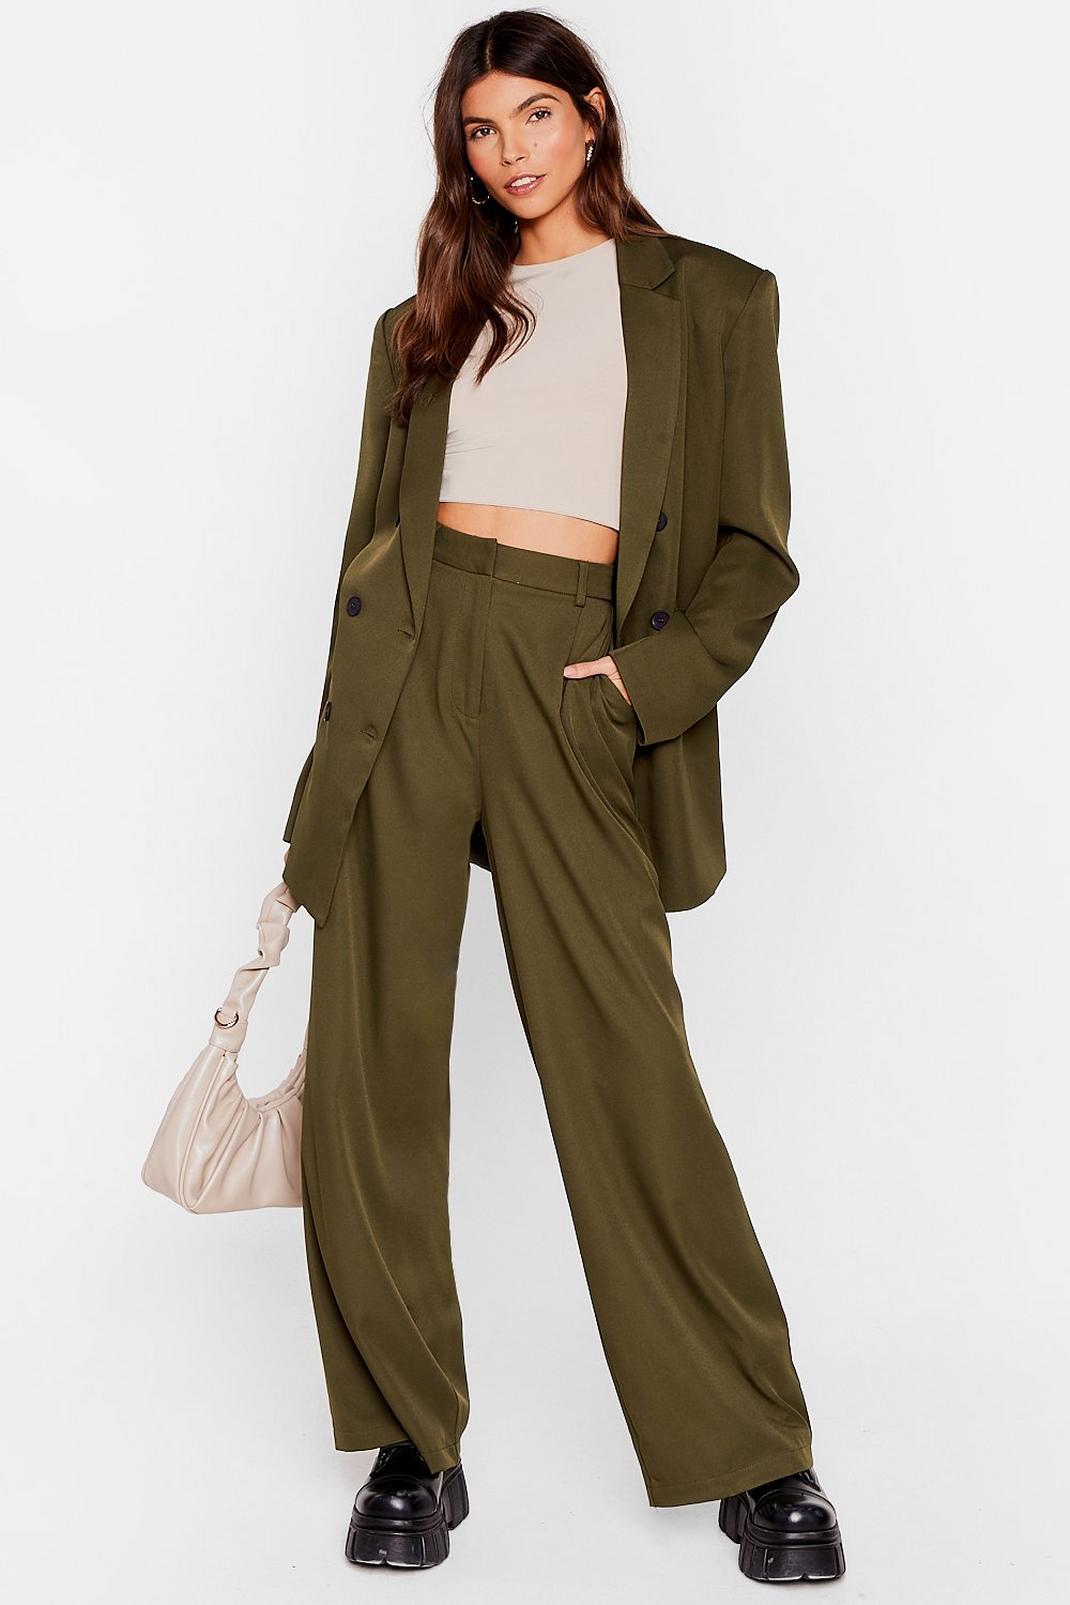 Olive Sorry We're Working Late Wide-Leg Pants image number 1